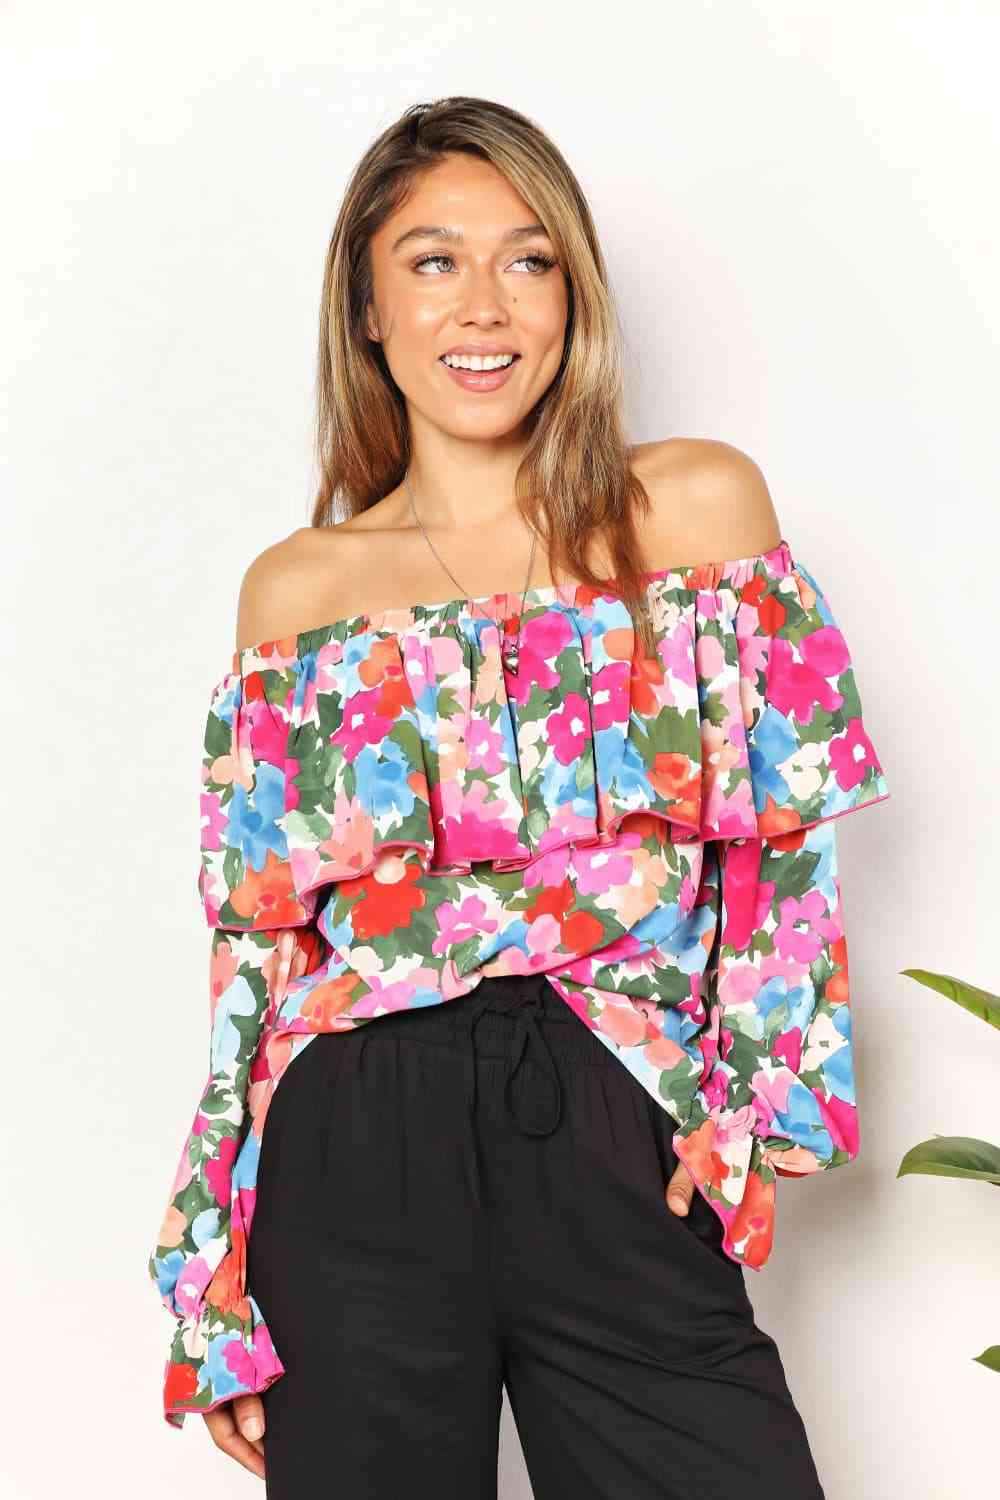 Double Take Floral Off-Shoulder Flounce Sleeve Layered Blouse - Tophatter Deals